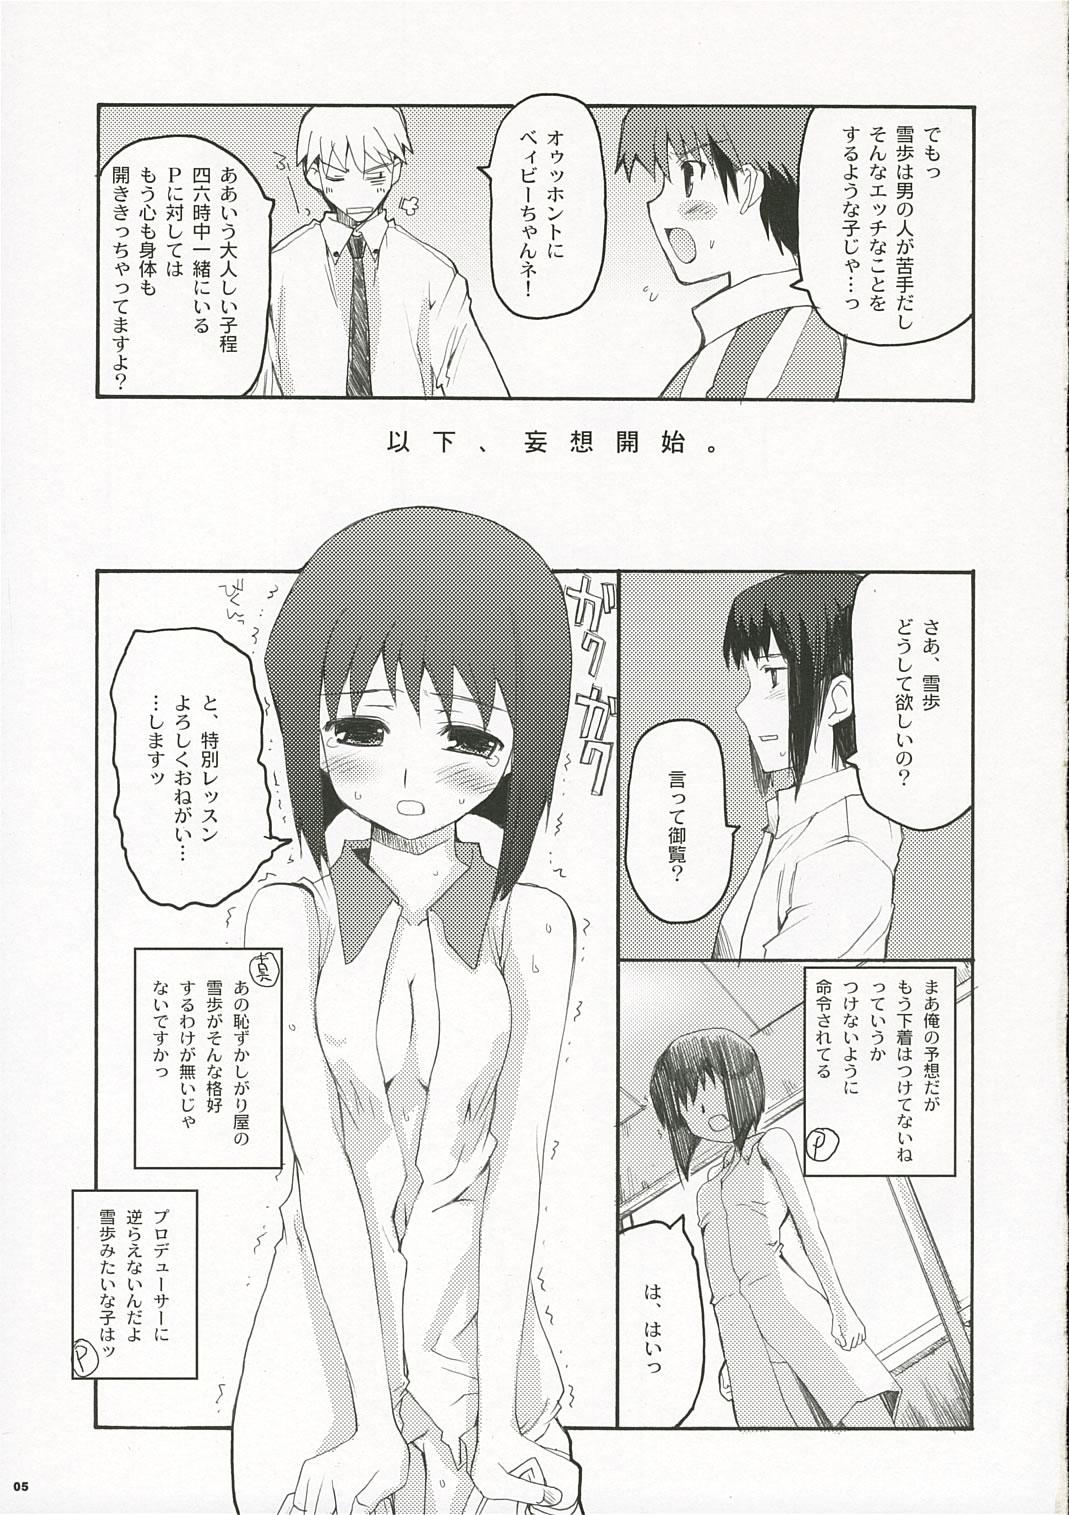 Old Vs Young ANGEL INTERCEPTOR - The idolmaster Aunt - Page 4